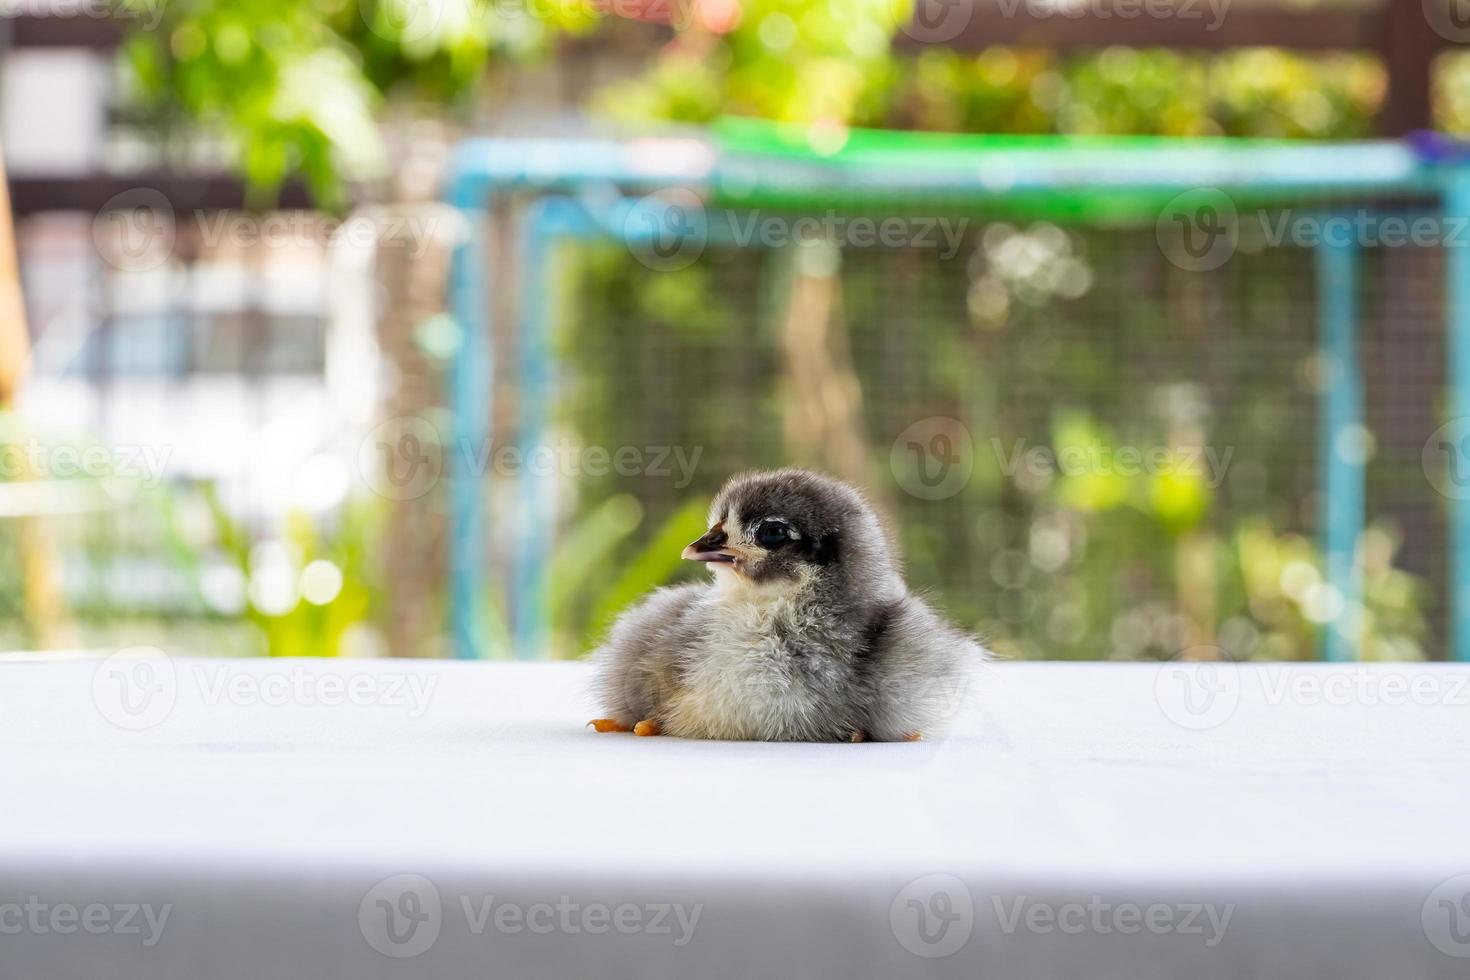 Black Baby Australorp Chick sit on white cloth cover the table with bokeh and blur garden at an outdoor field photo